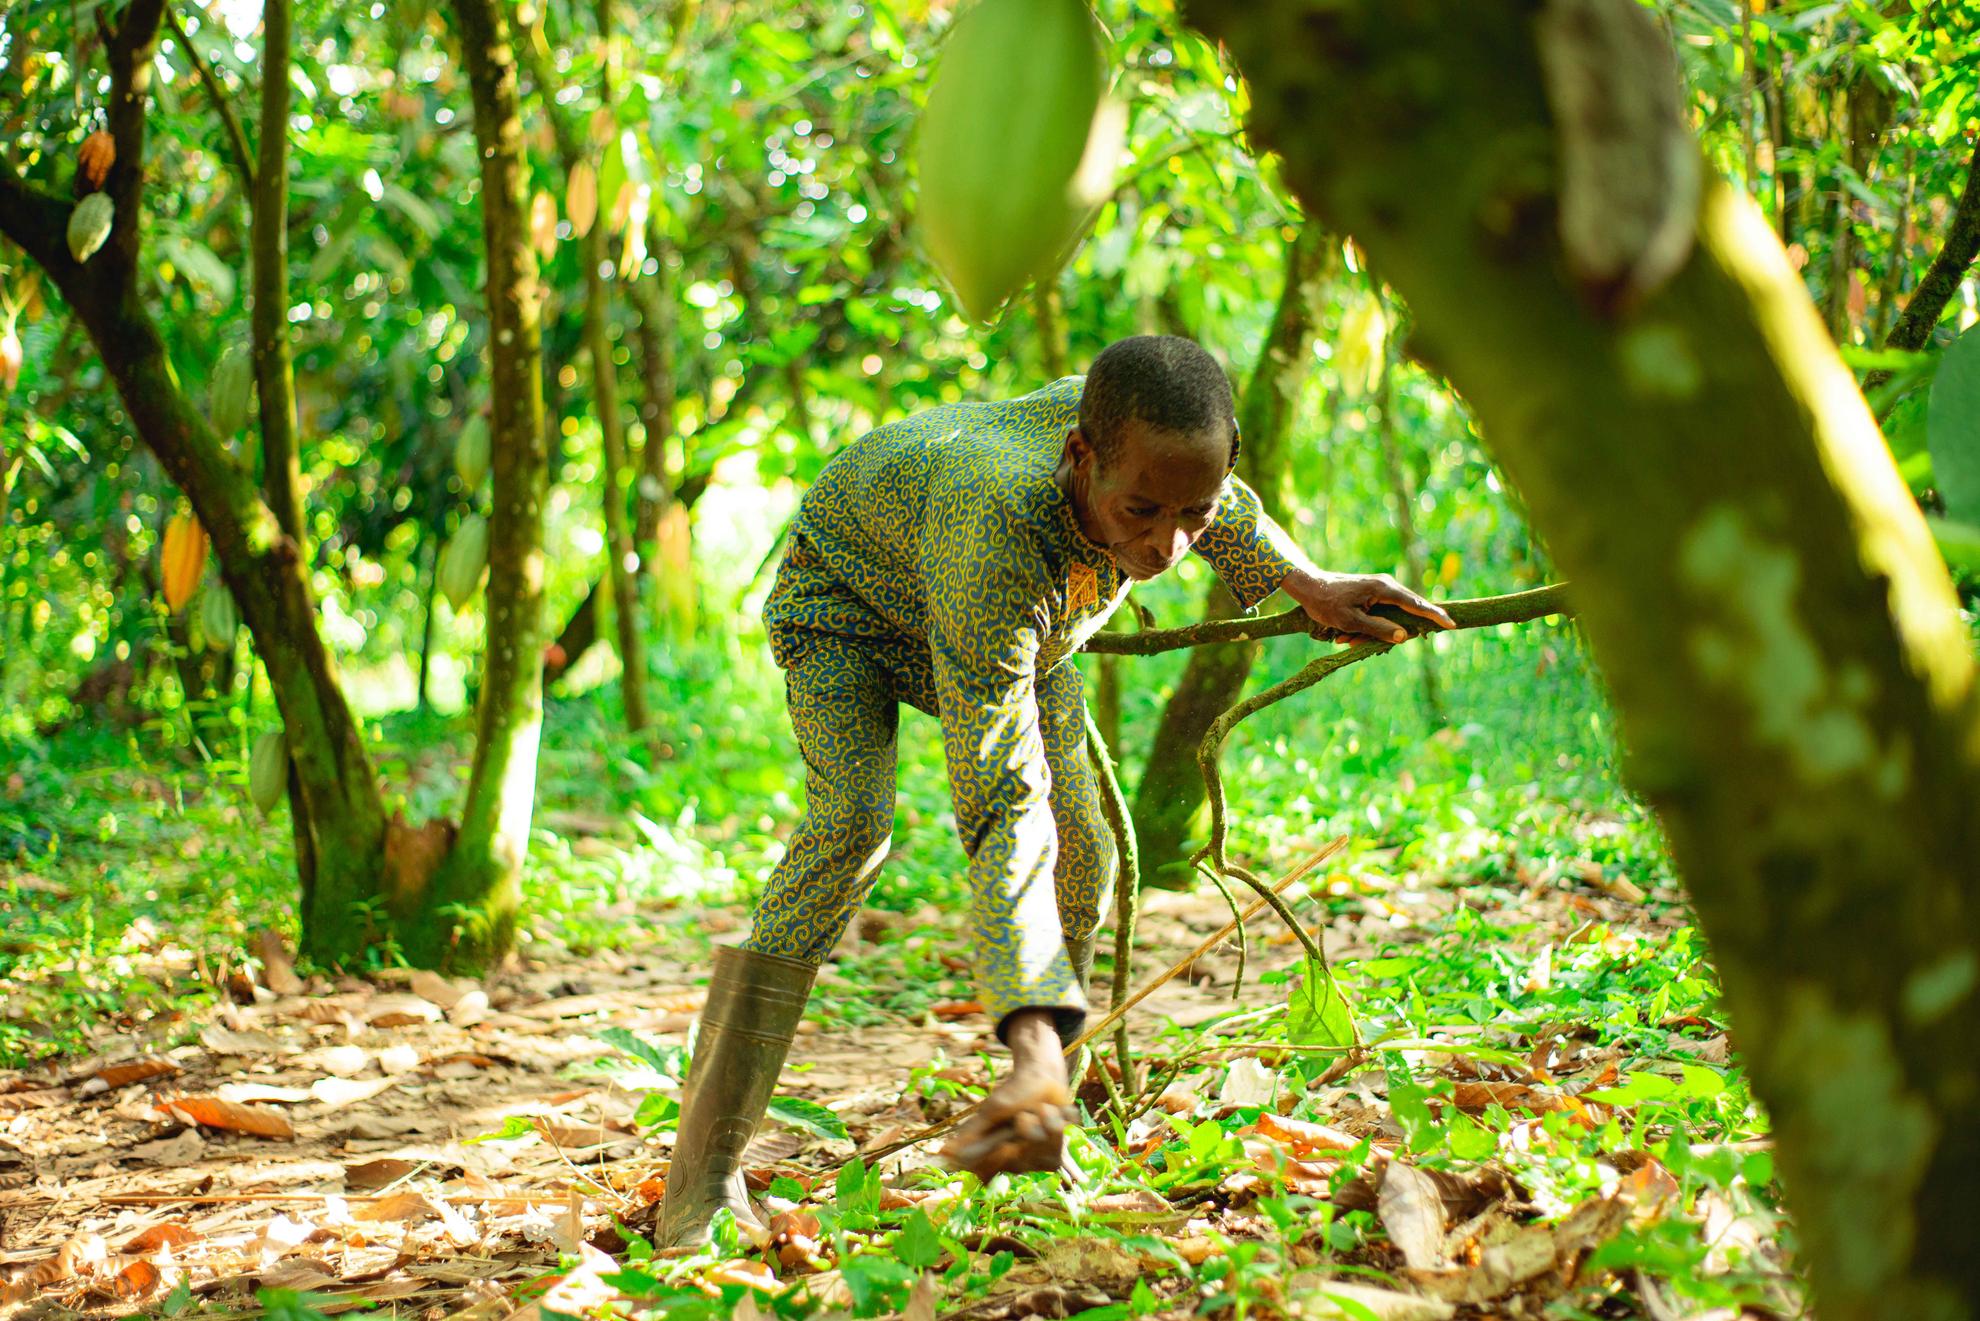 An AFEX cocoa farmer working on his farm. This depicts a functioning traceability system.